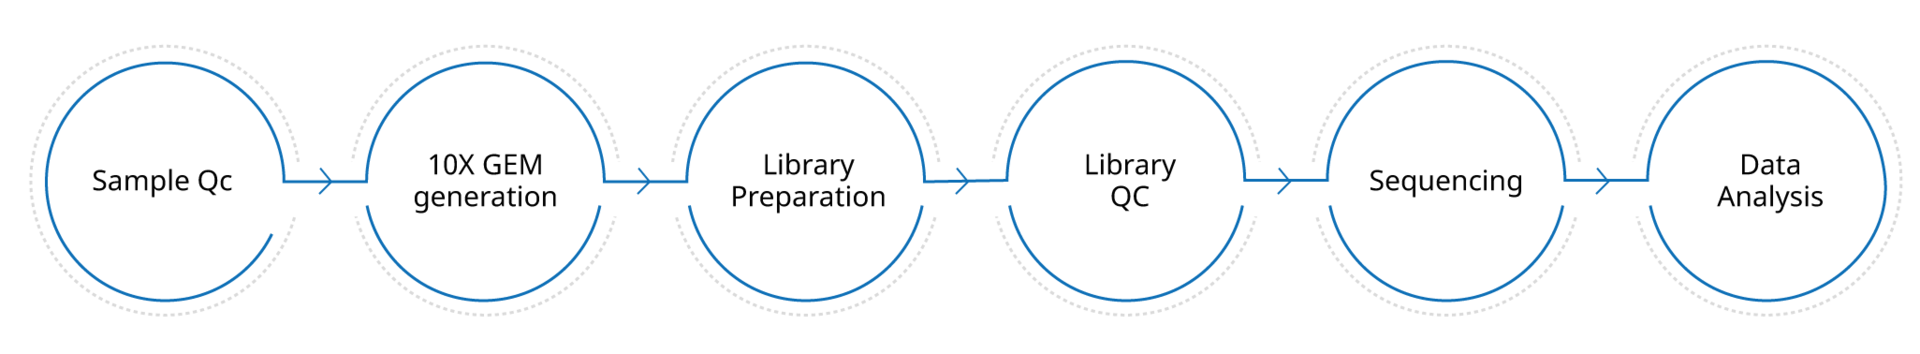 Sample QC, 10X GEM generation, Library preparation, Library QC, Sequencing, Data Analysis 